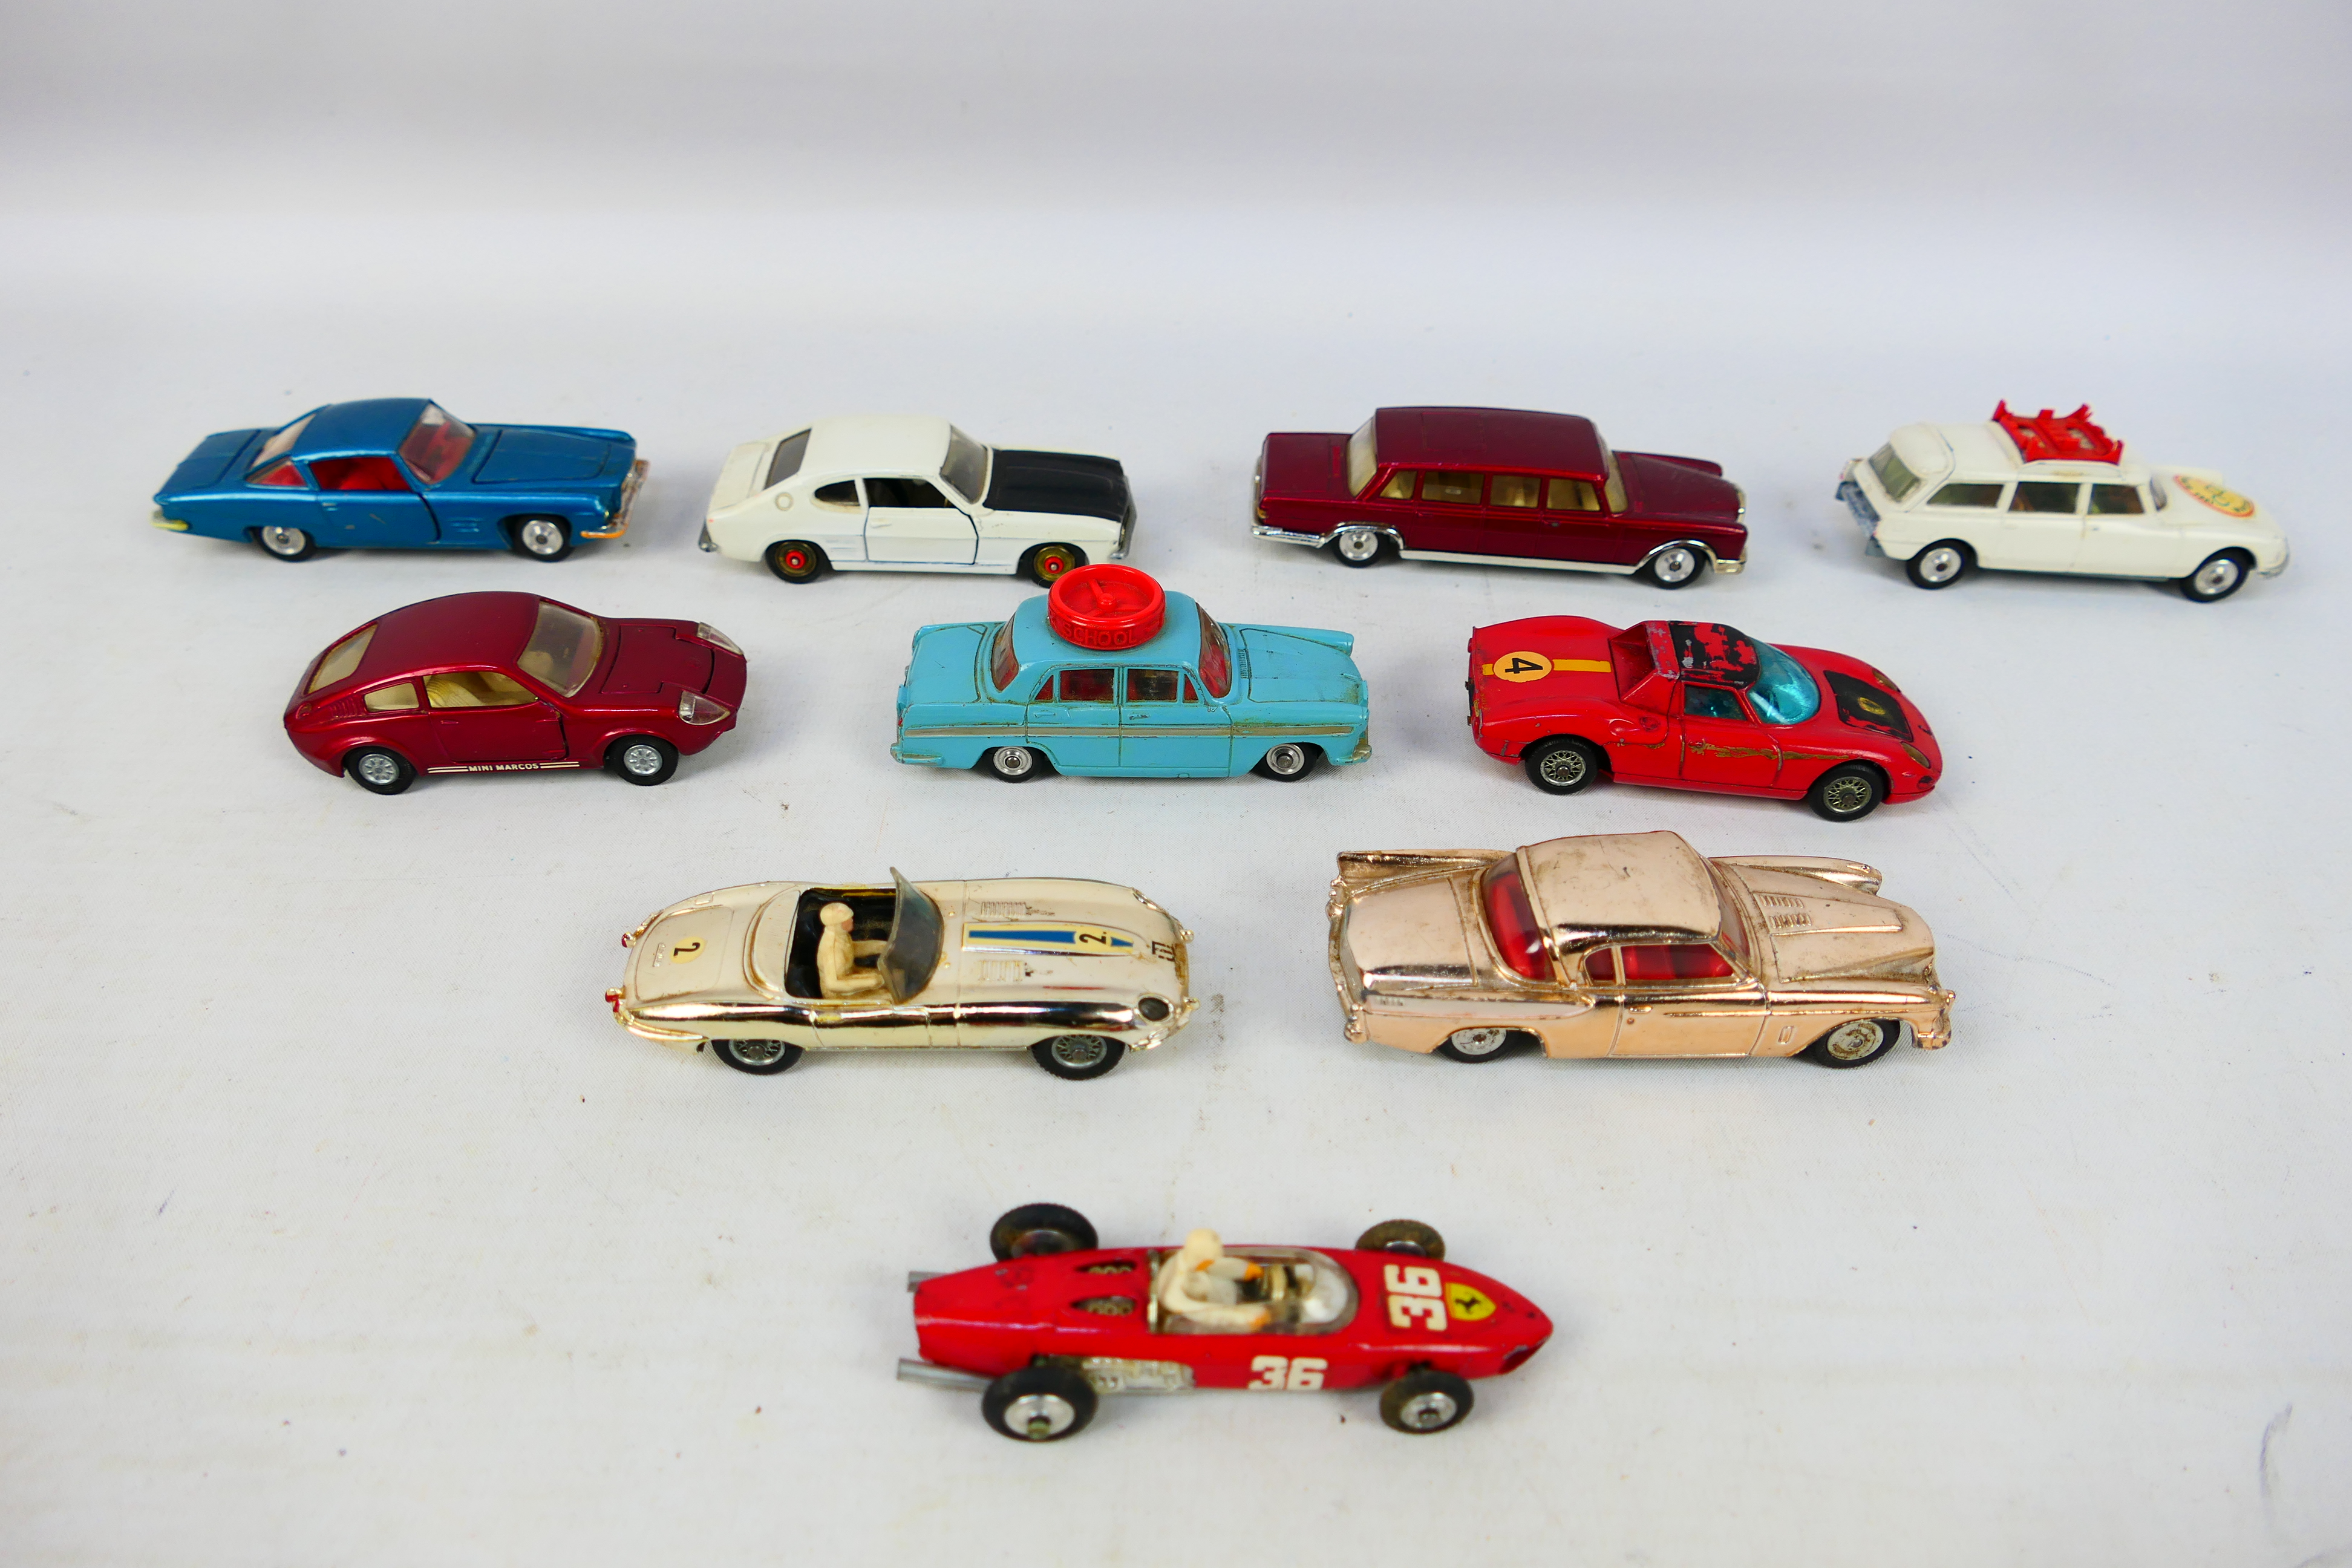 Corgi Toys - An unboxed group of 10 diecast model cars from Corgi Toys. - Image 9 of 10